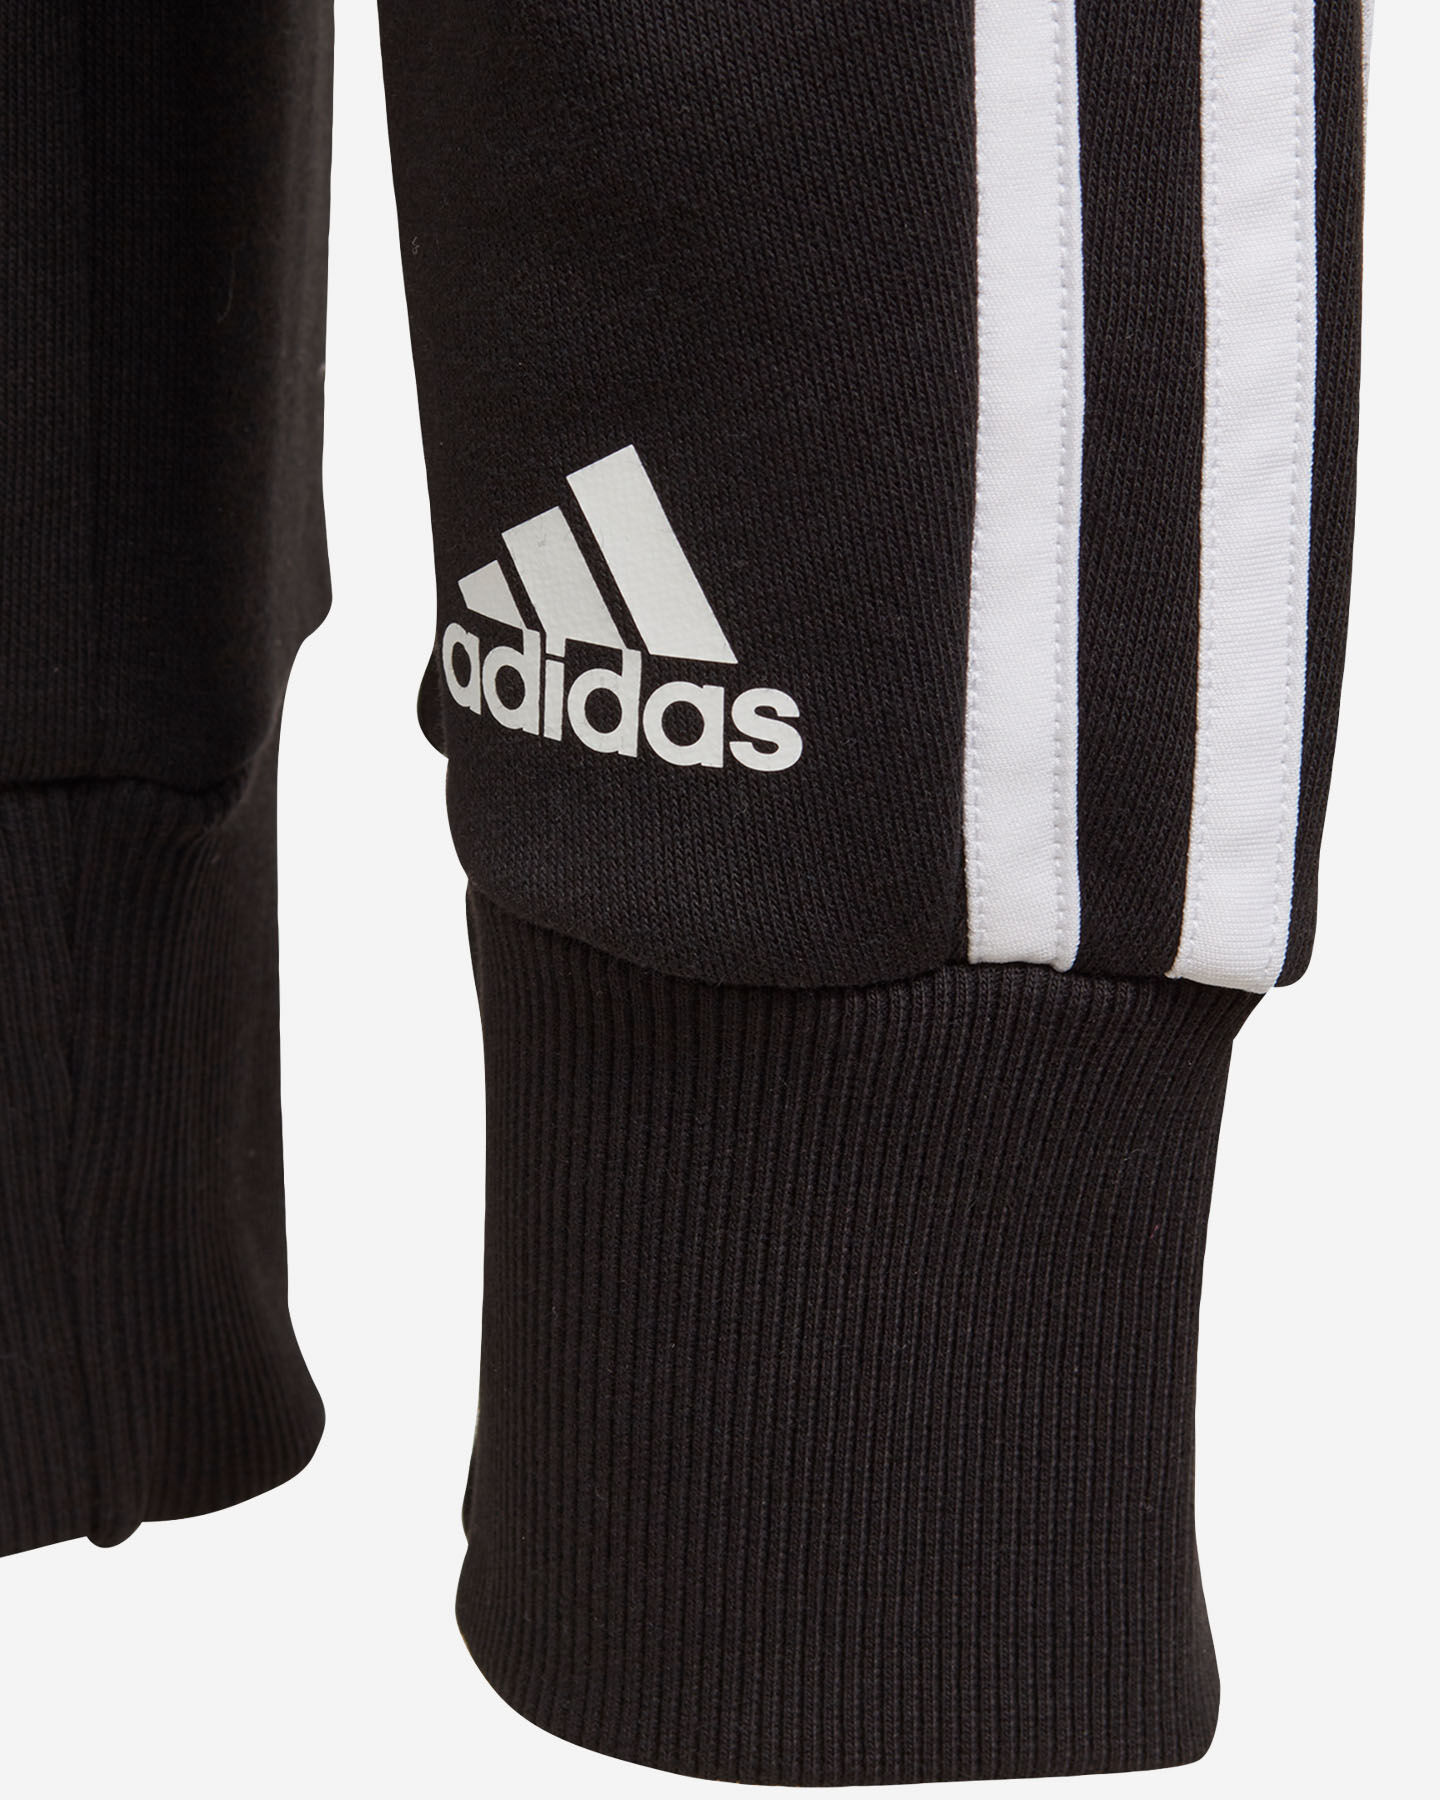  Pantalone ADIDAS MUST HAVES 3-STRIPES JR S5011814|UNI|7-8A scatto 4